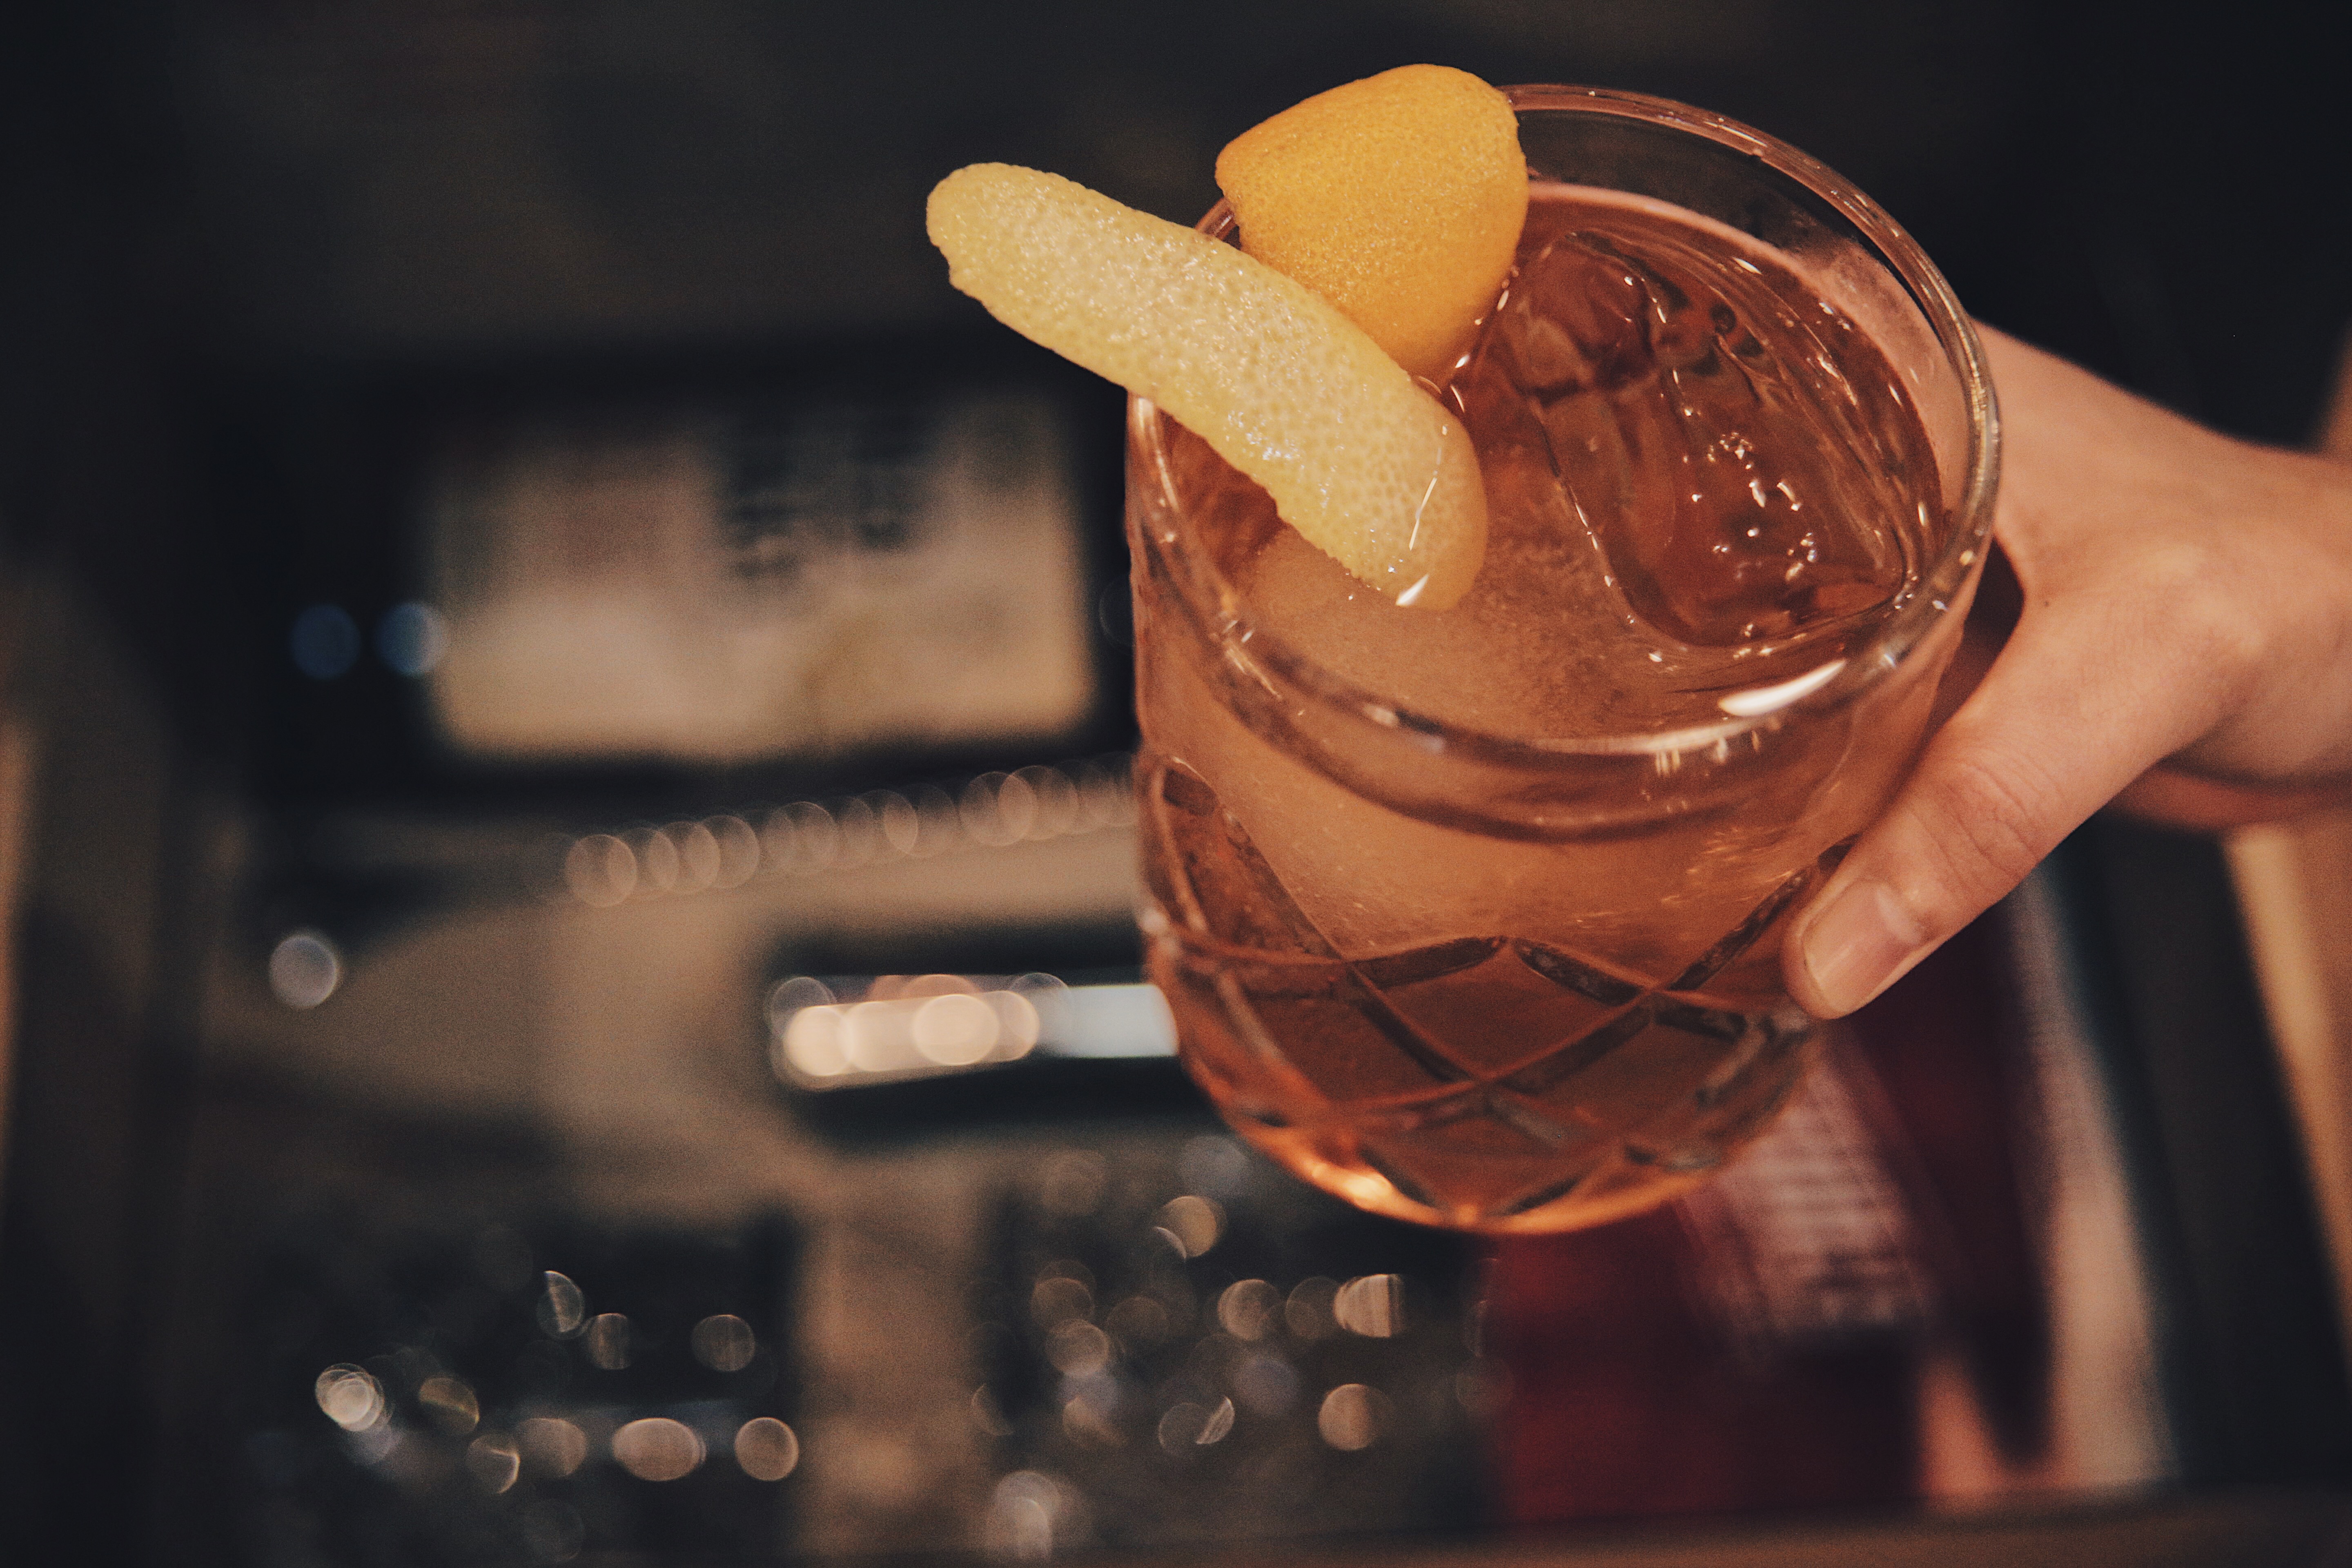 Learn how to make an Old Fashioned with BevTools cocktail kits. PHOTO: BevTools